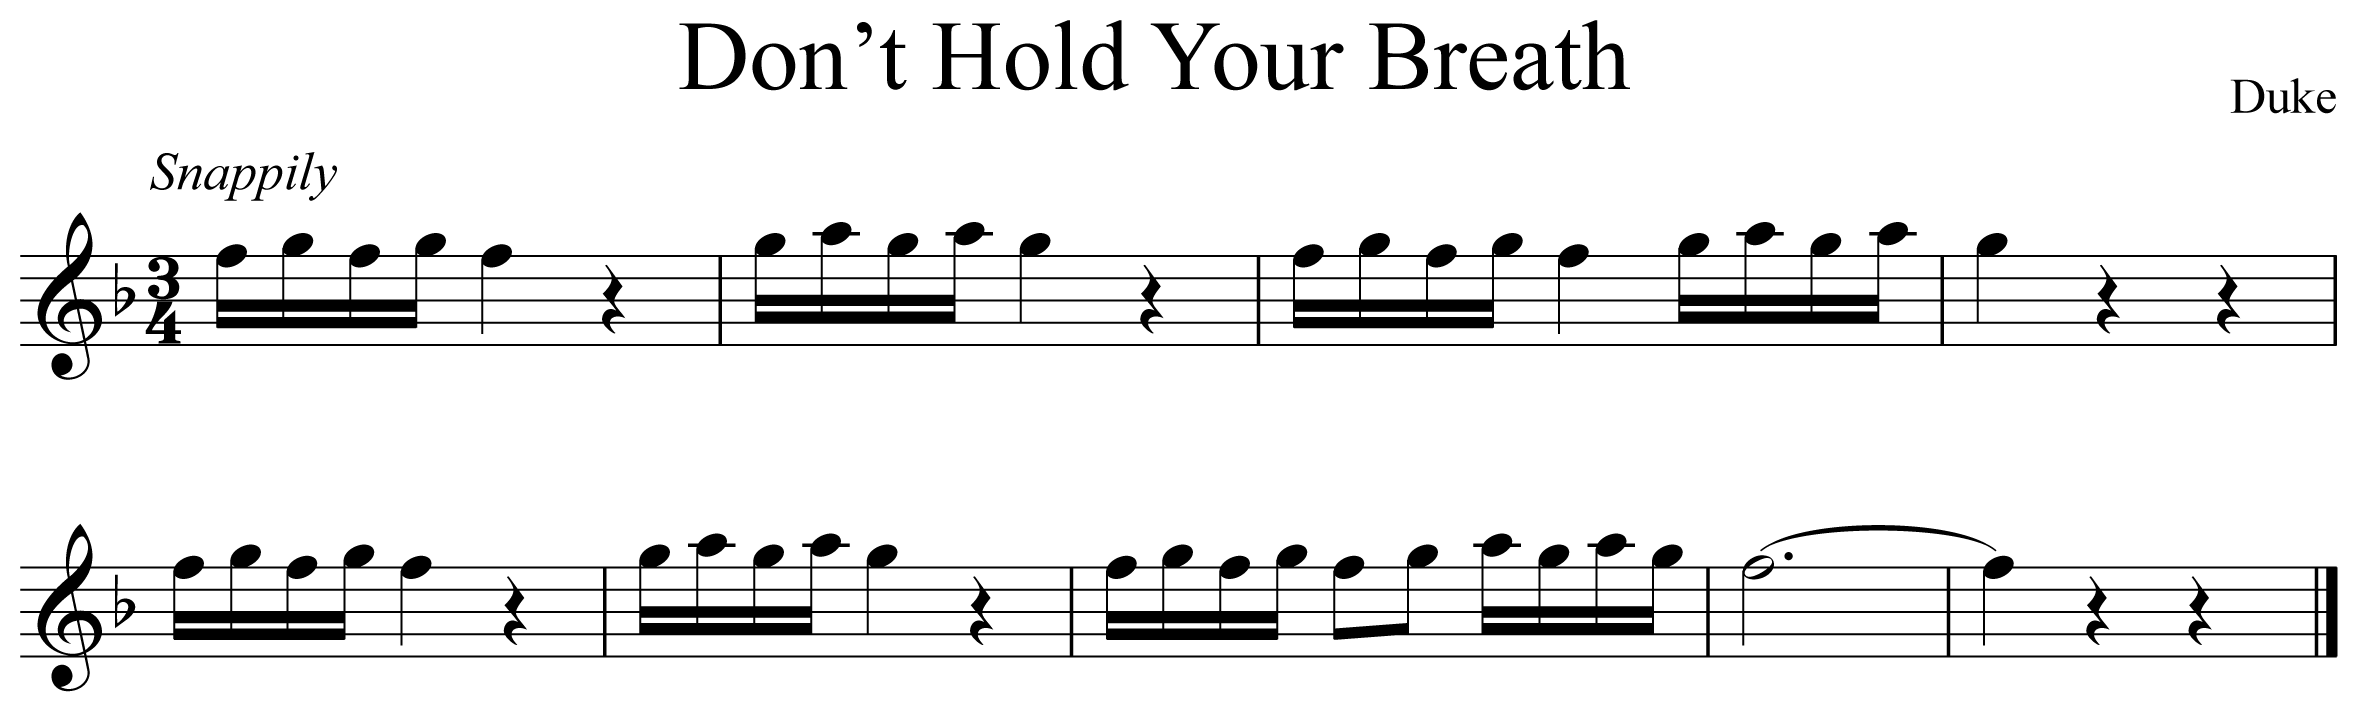 Don't Hold Your Breath Music Notation Flute